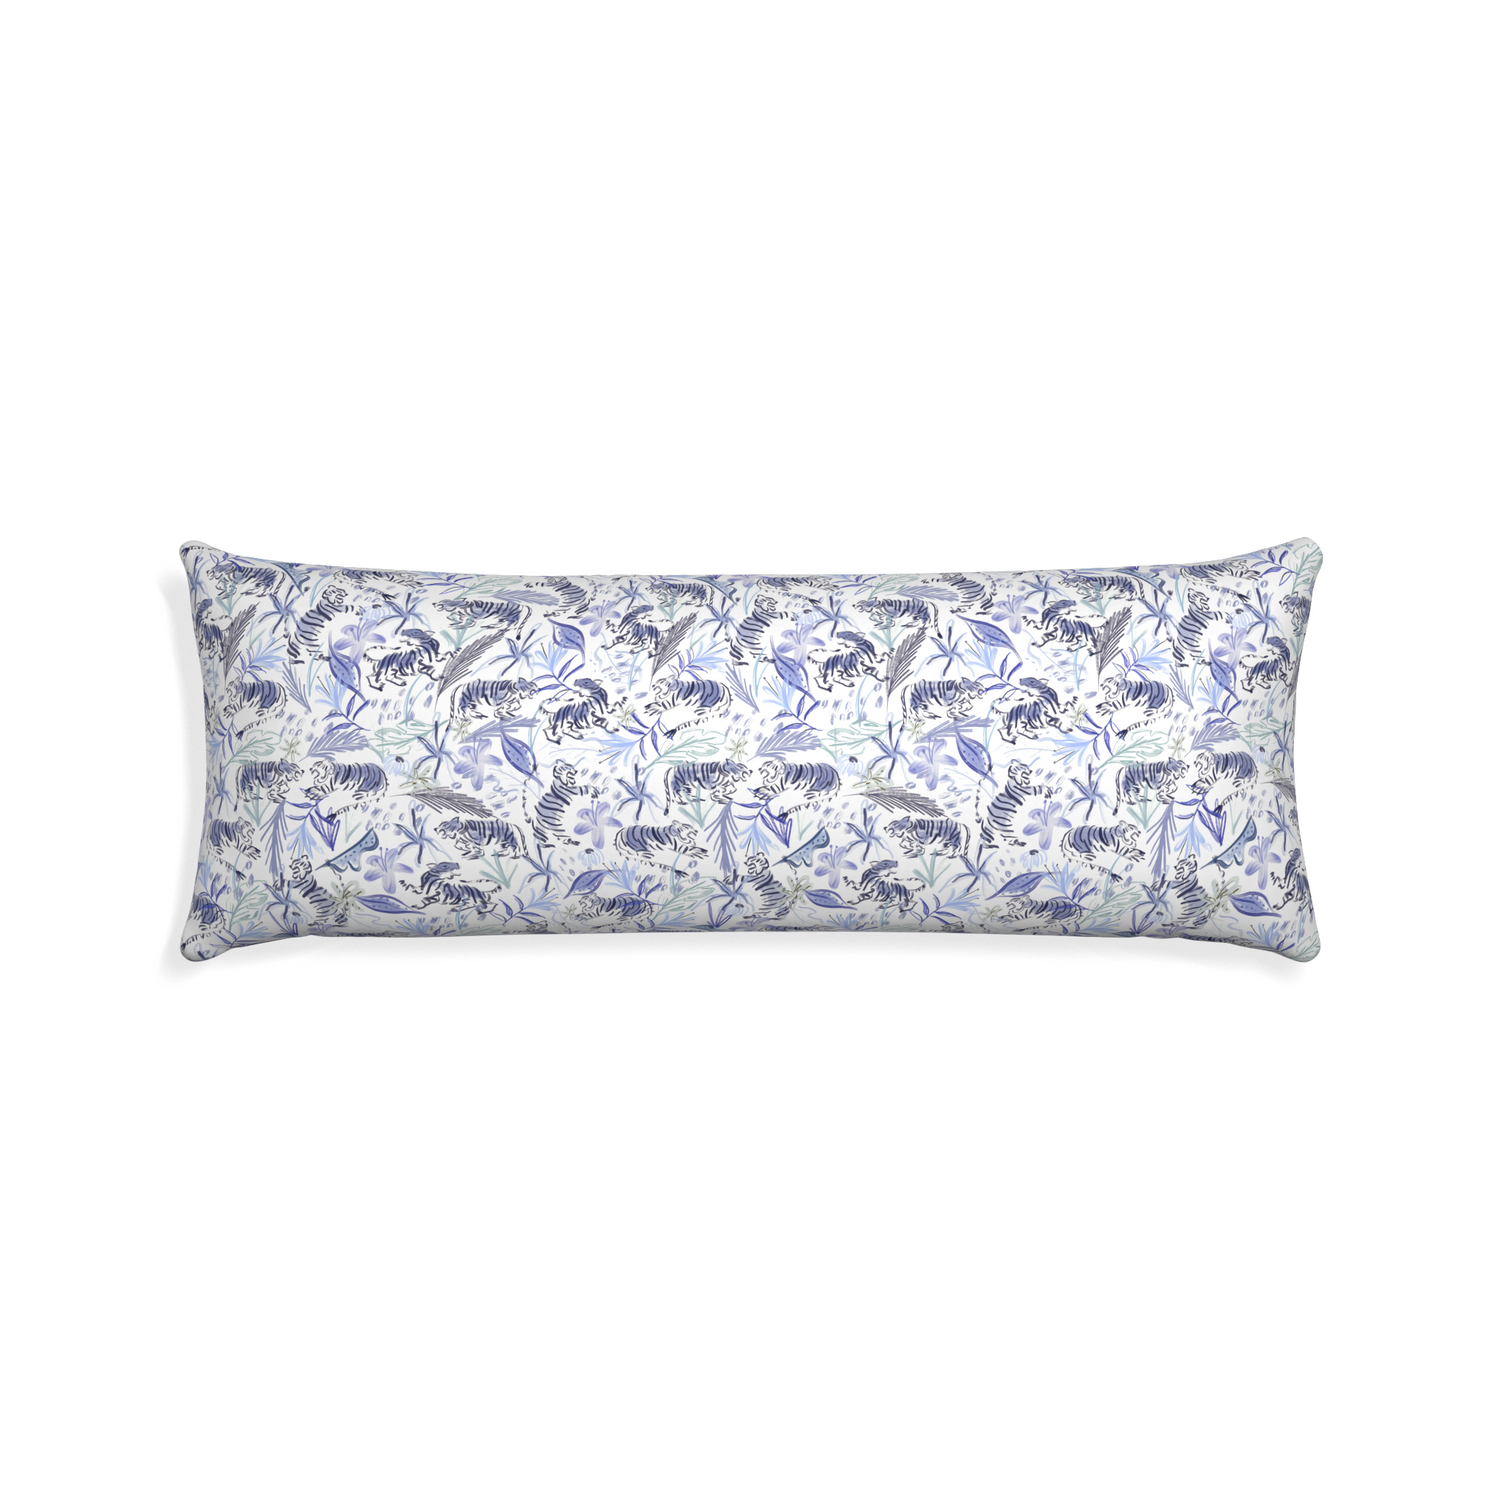 Xl-lumbar frida blue custom blue with intricate tiger designpillow with none on white background